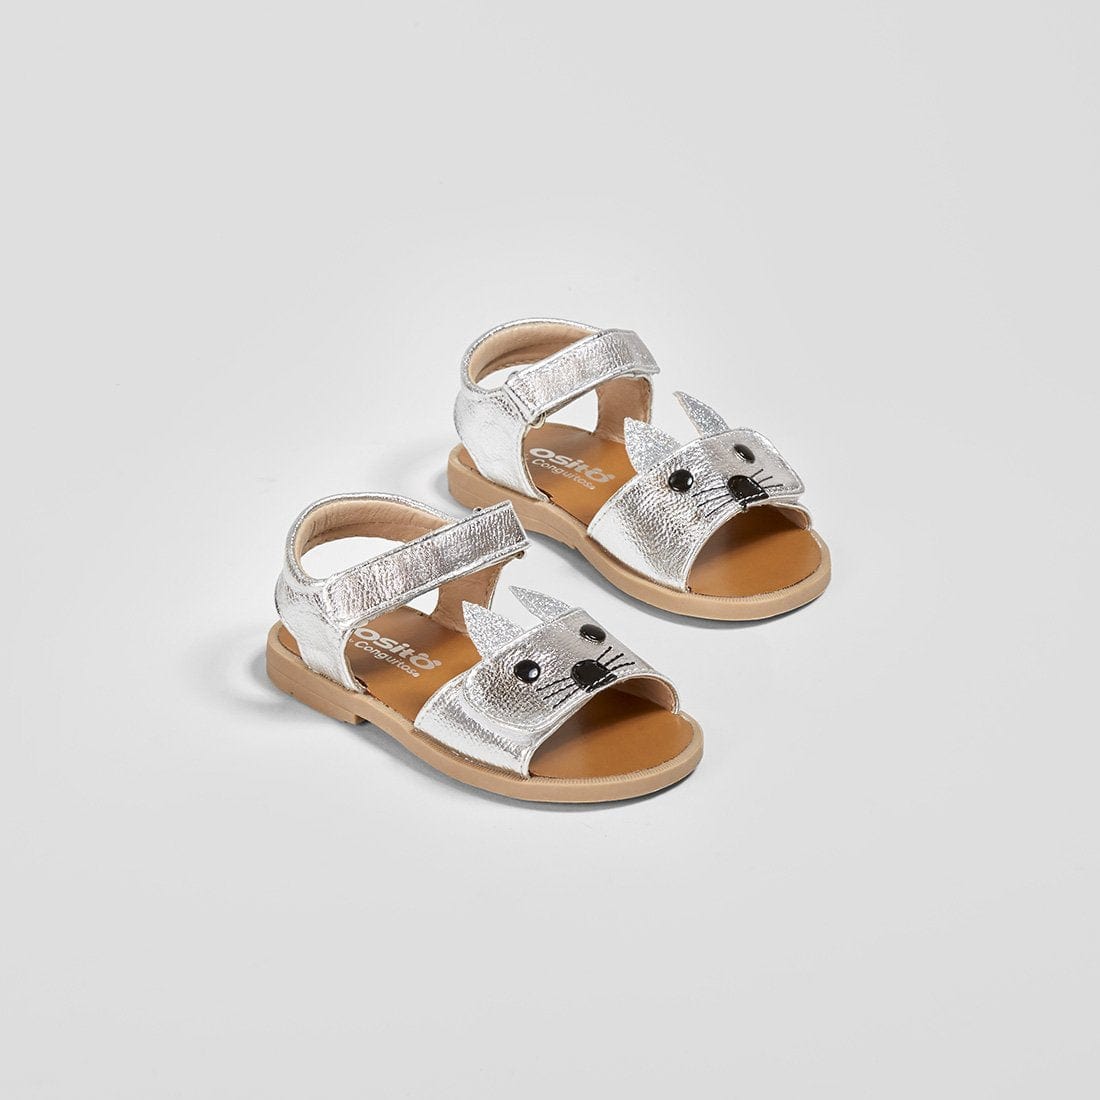 OSITO Shoes Baby's Metallic Silver Kitten Sandals